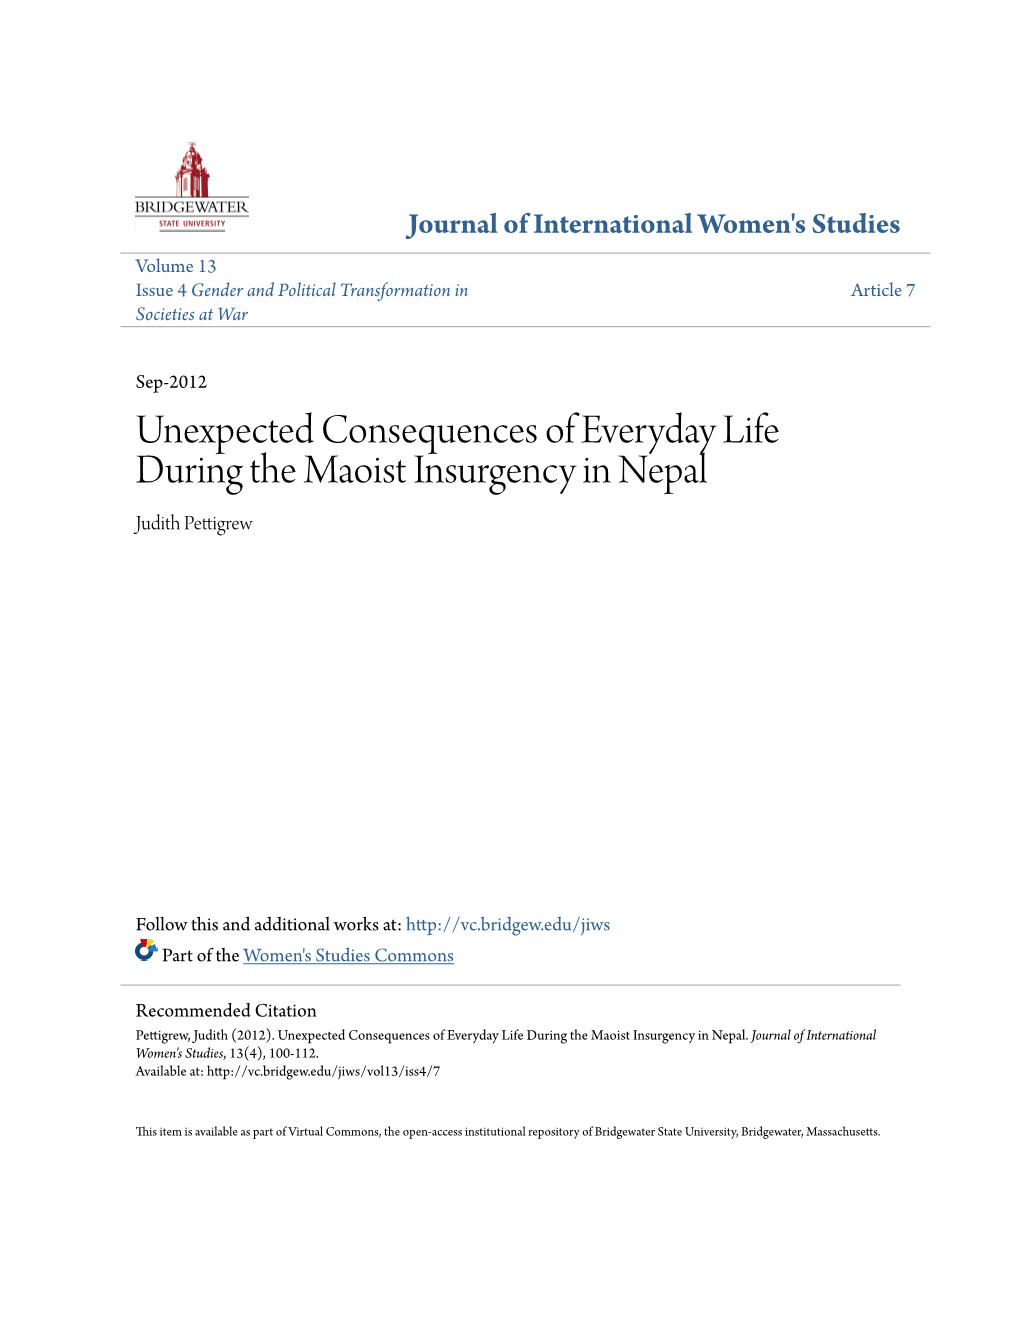 Unexpected Consequences of Everyday Life During the Maoist Insurgency in Nepal Judith Pettigrew